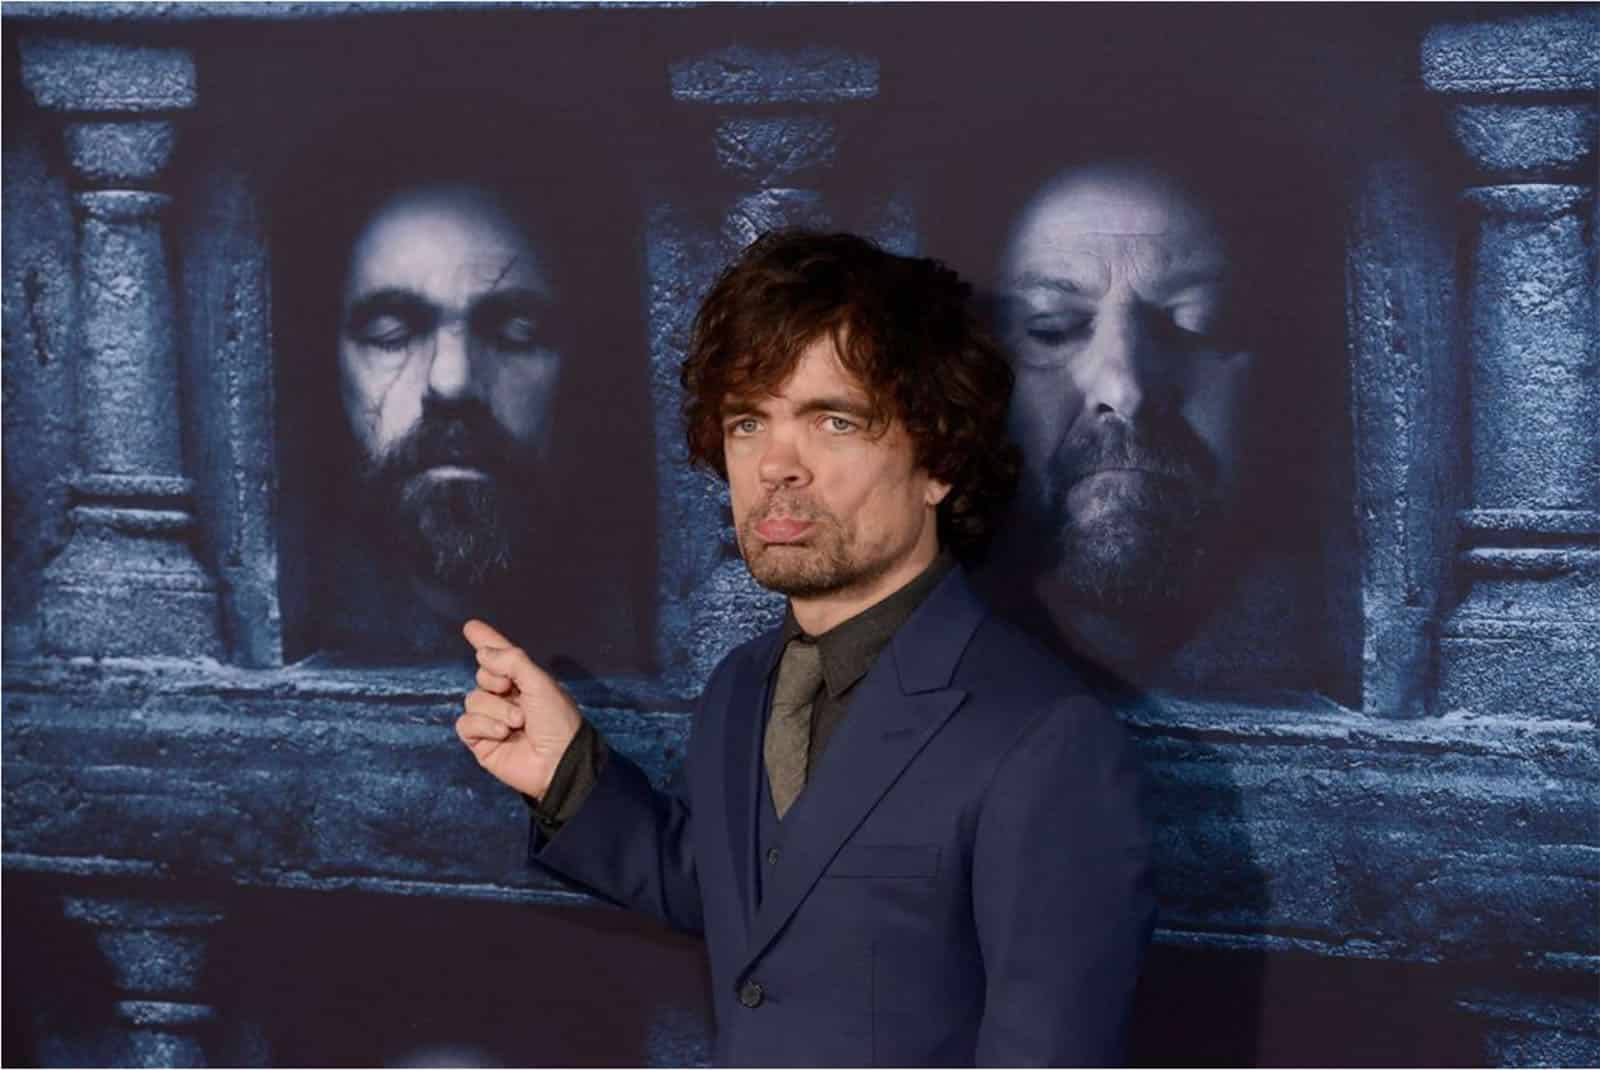 Peter Dinklage From Game of Thrones Fears His iPhone